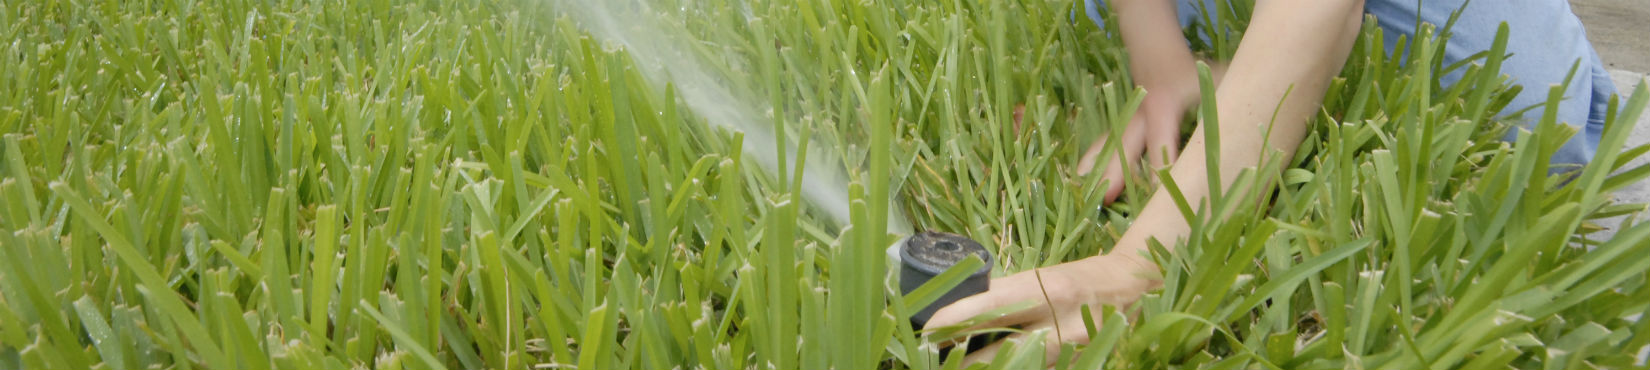 hands adjusting an irrigation rotor head in green grass